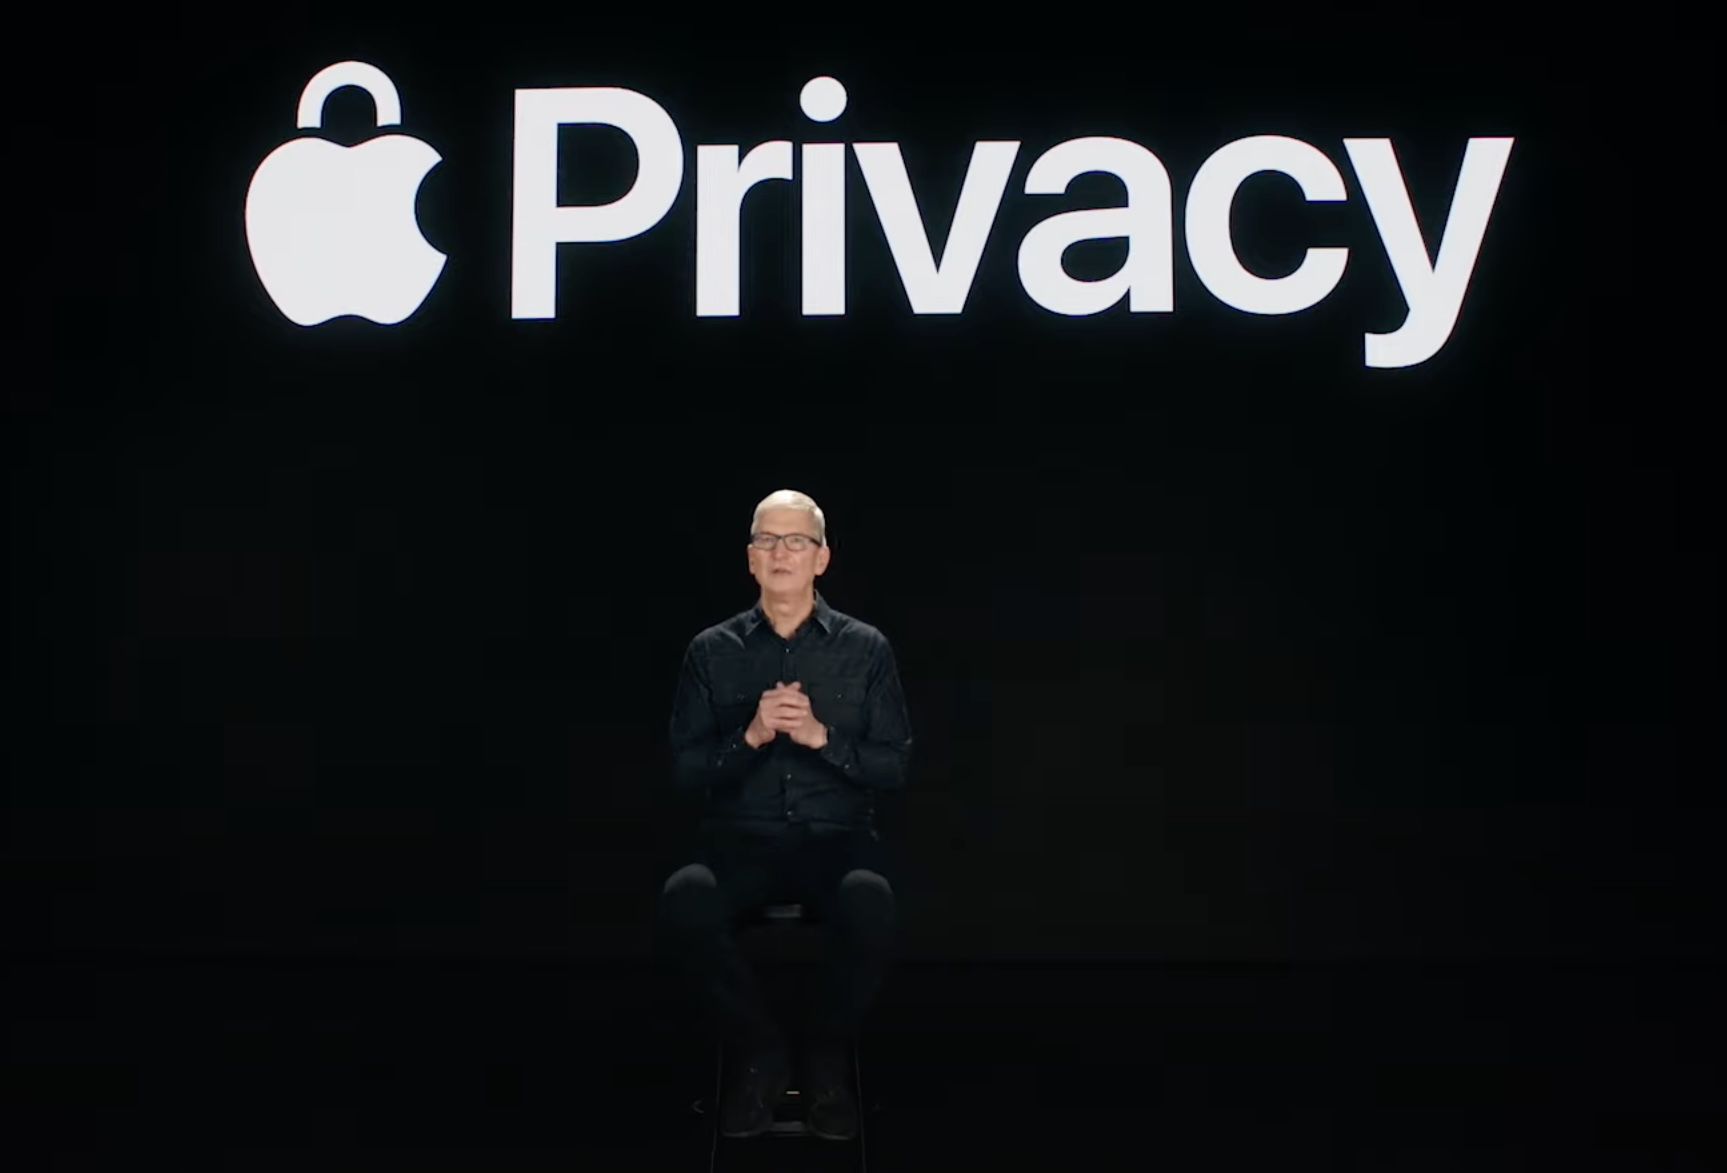 Apple Collects the Least Amount of User Data Out of Major Tech Companies, Study ..